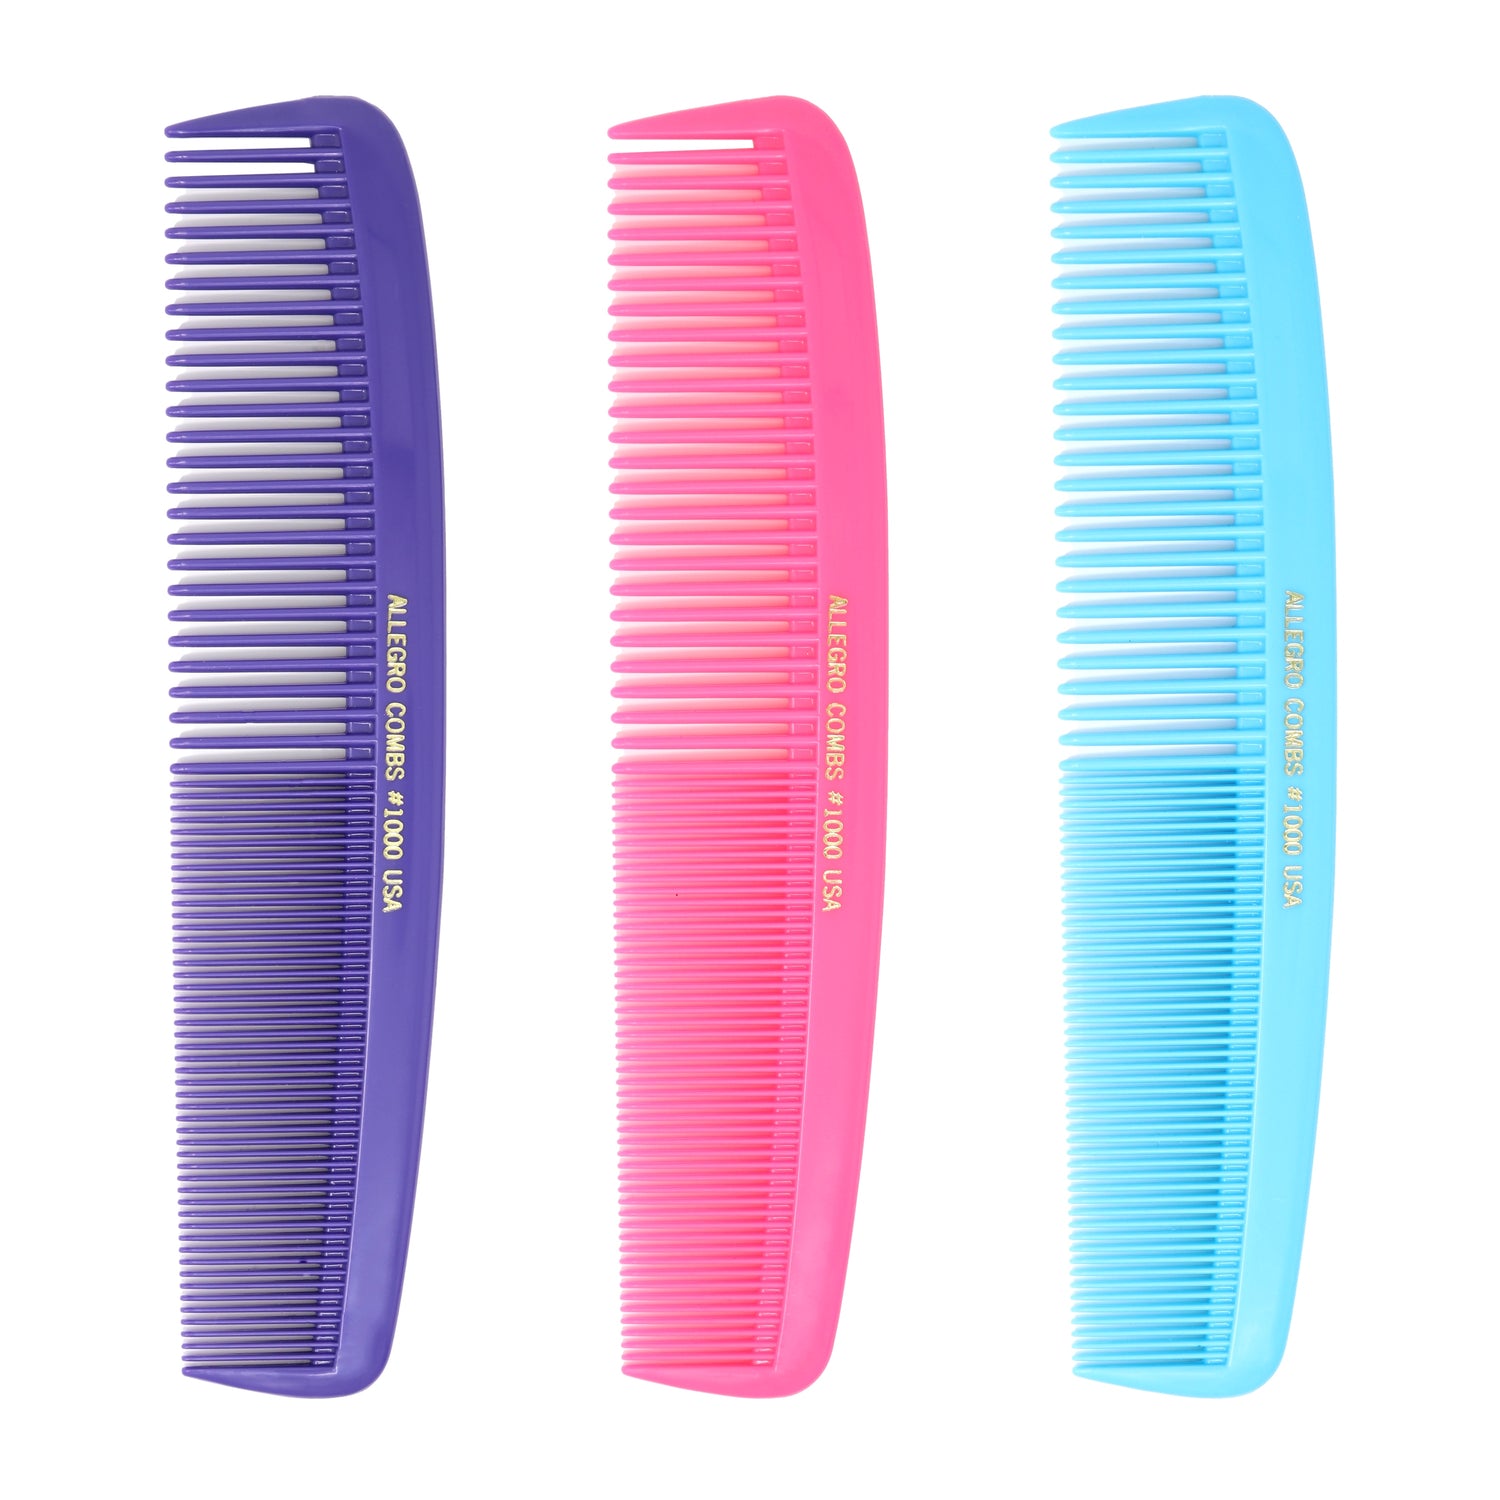 EXTRA LARGE COMBS FROM ALLEGRO COMBS IN MANY COLOR